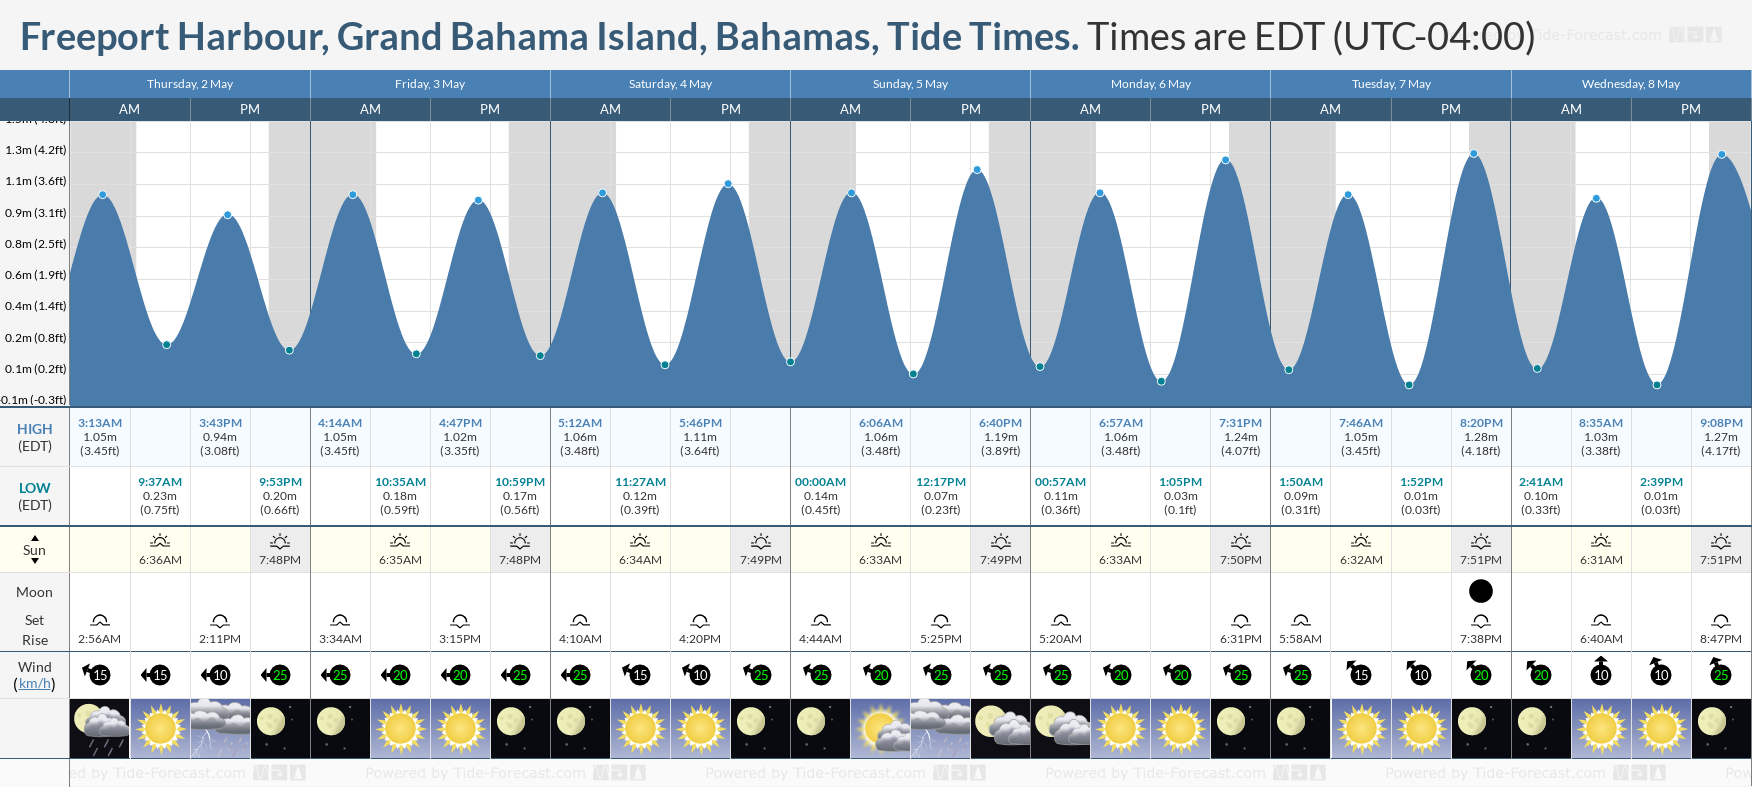 Freeport Harbour, Grand Bahama Island, Bahamas Tide Chart including high and low tide tide times for the next 7 days